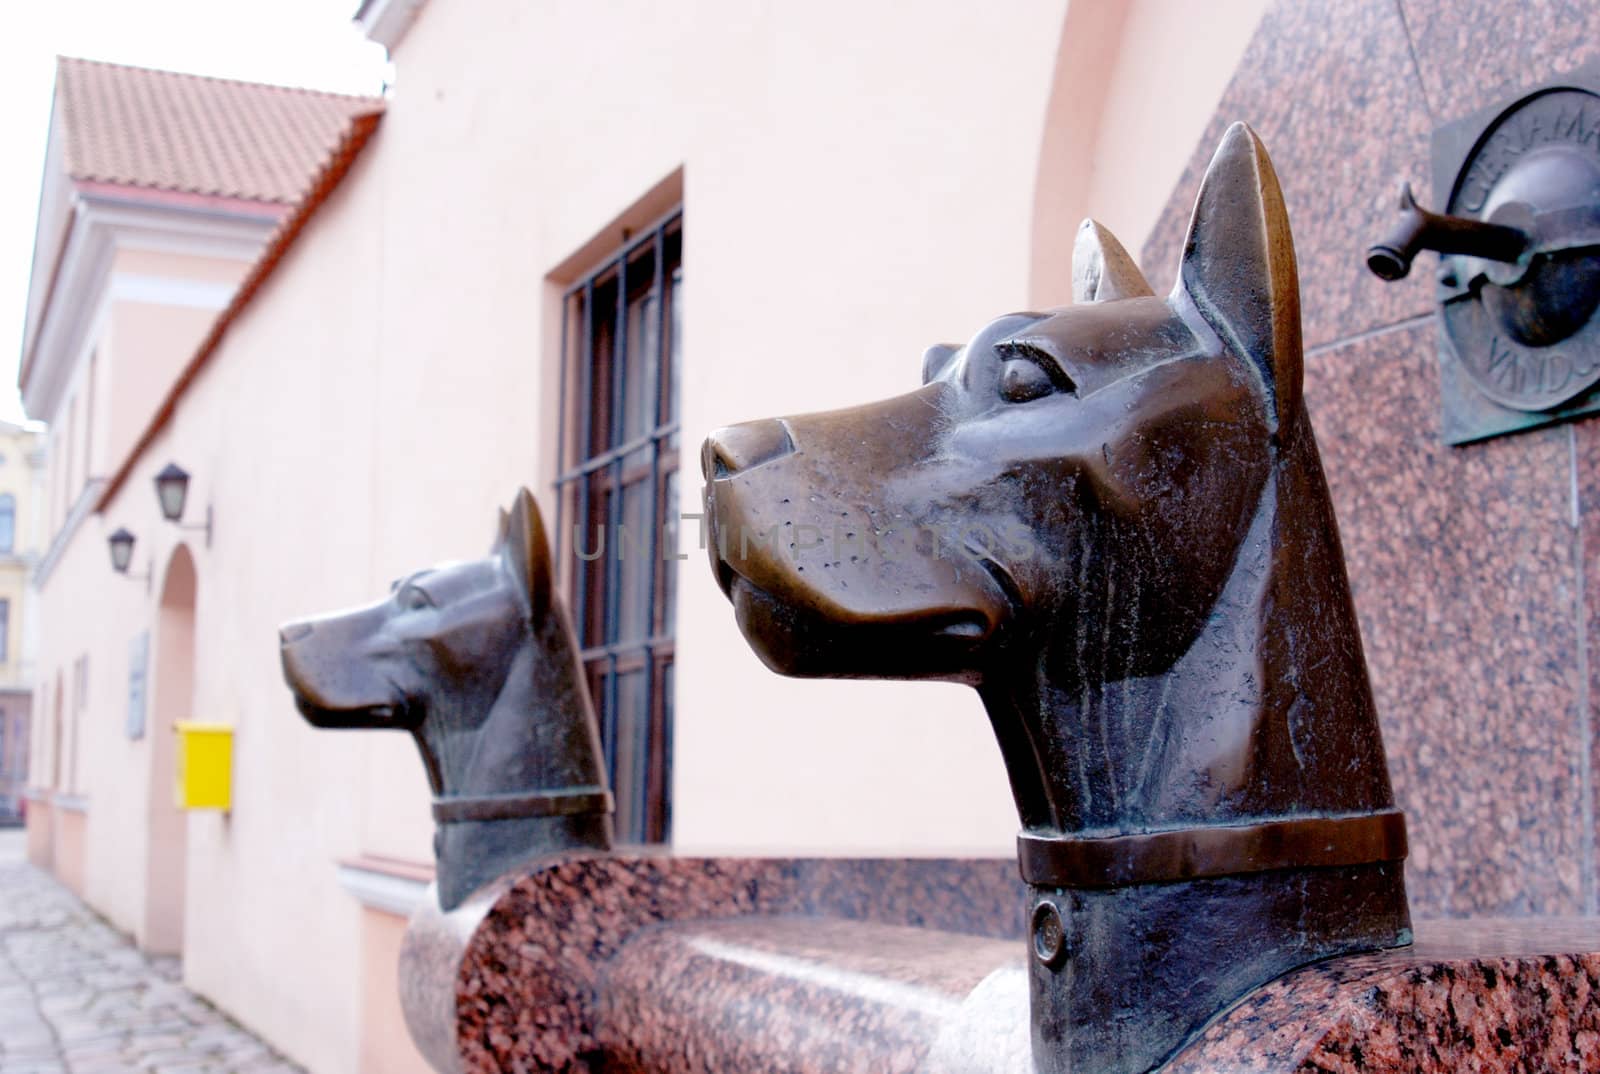 Sculptures of two metal dog heads near the water tap in the street